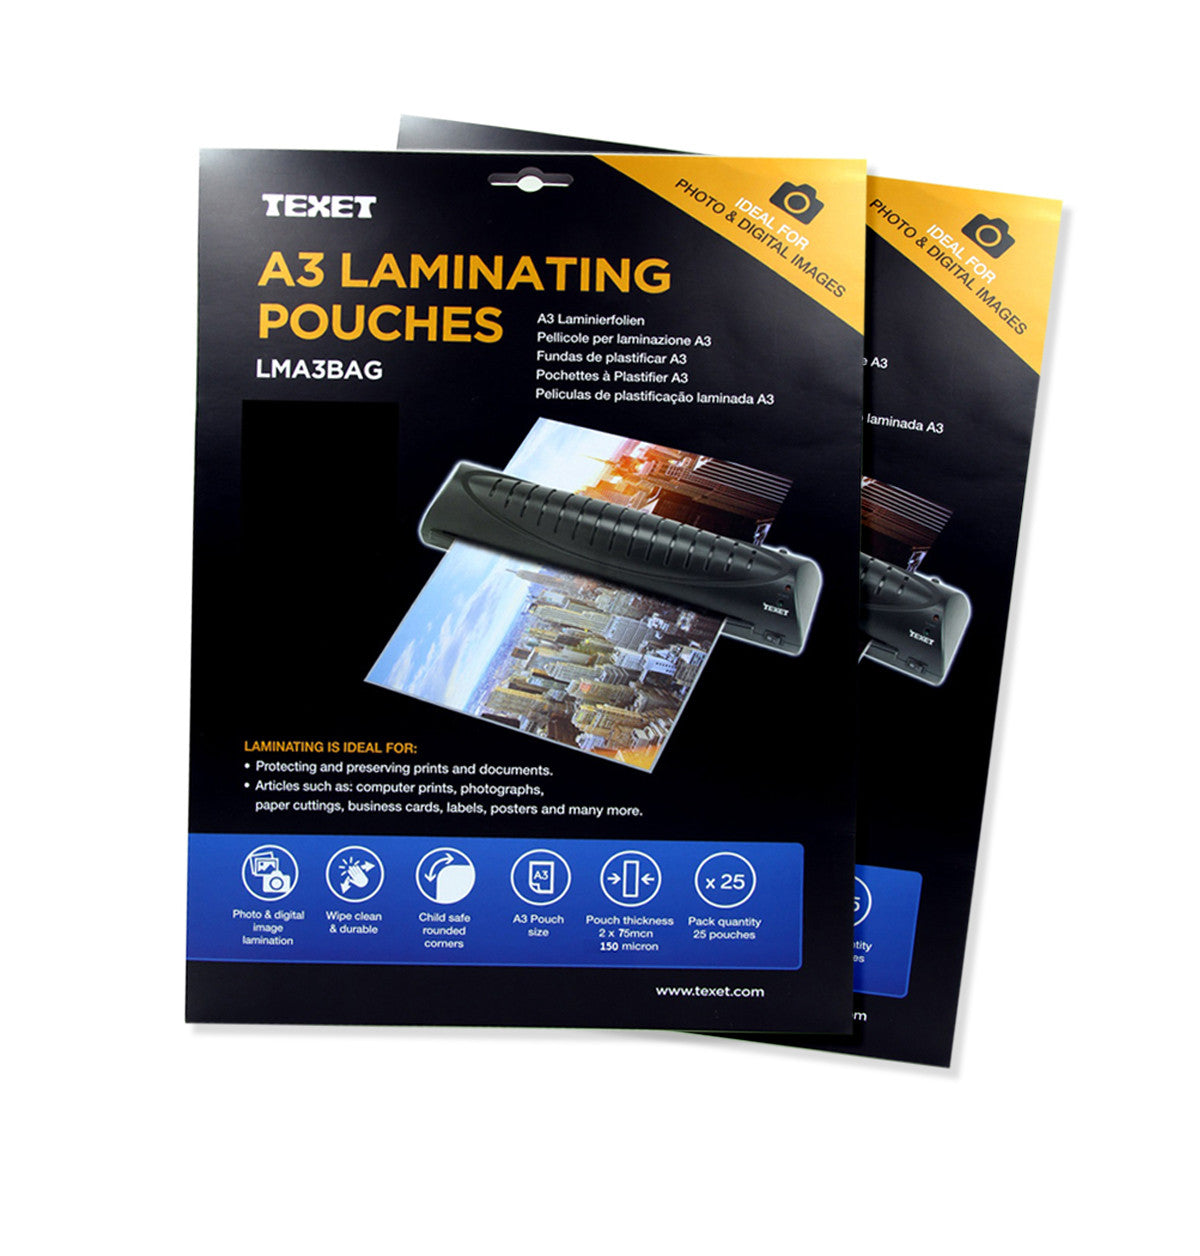 TEXET A3 High Quality laminating pouches - Pack of 50 pouches